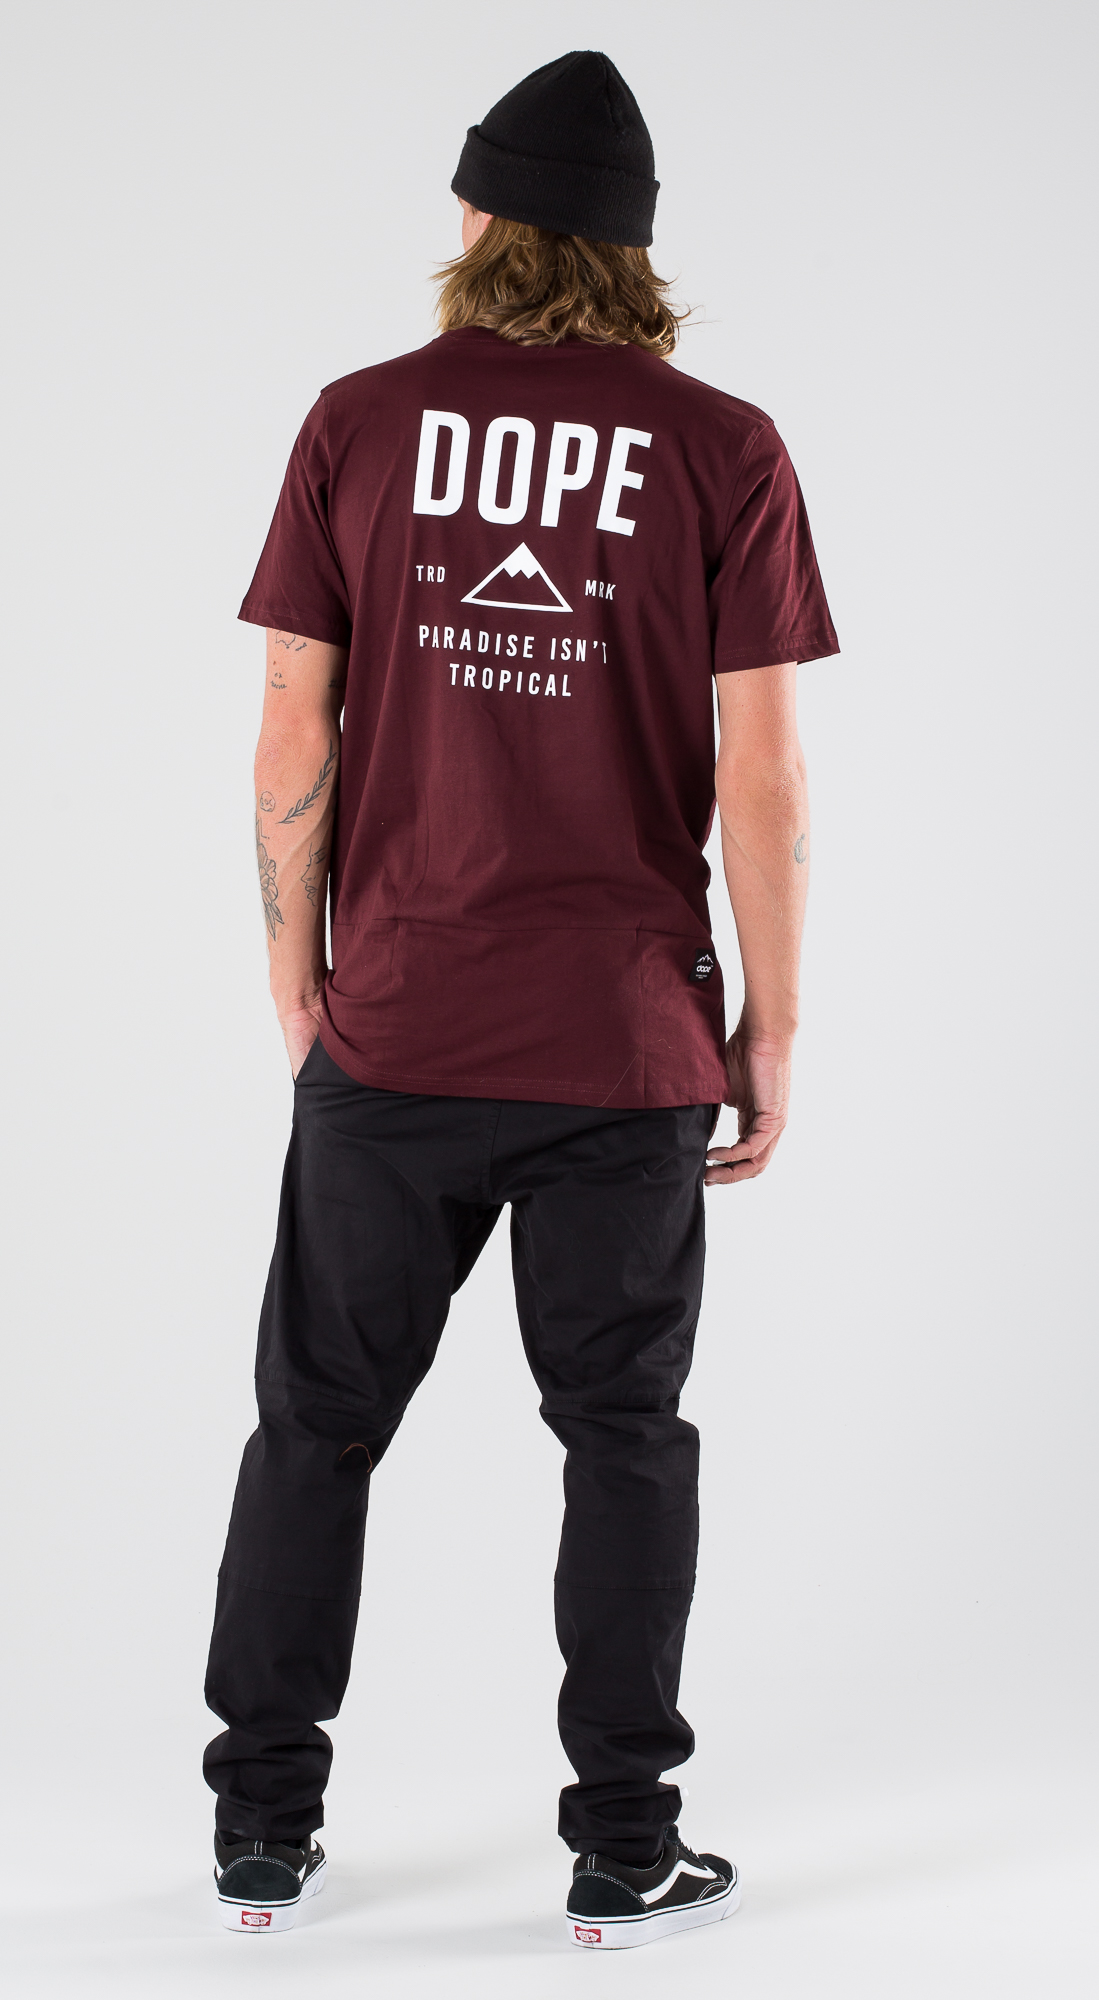 maroon t shirt outfit